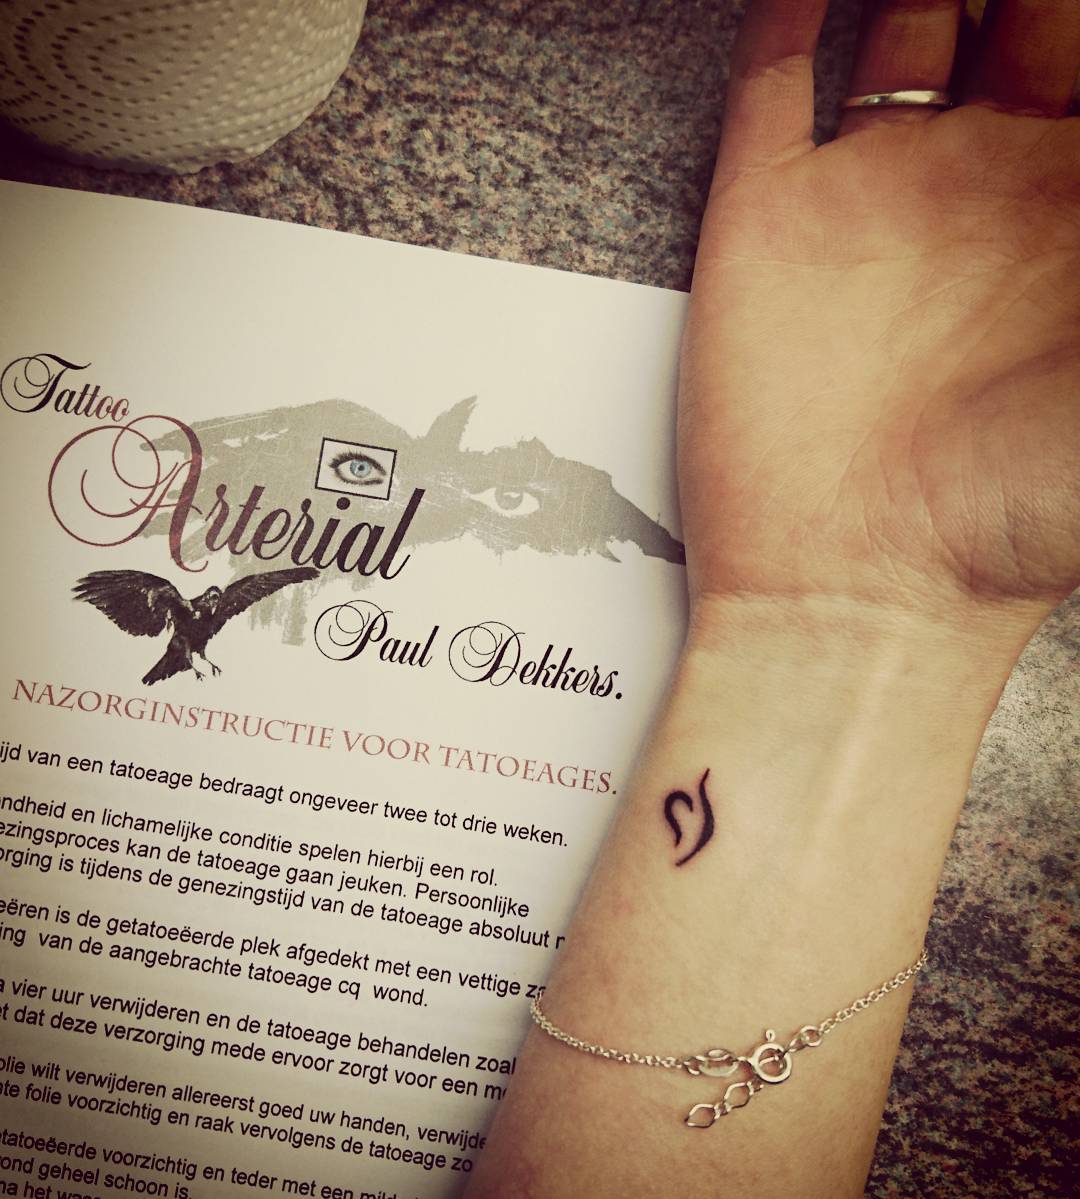 17 Meaningful Tattoo Ideas That Inspire You